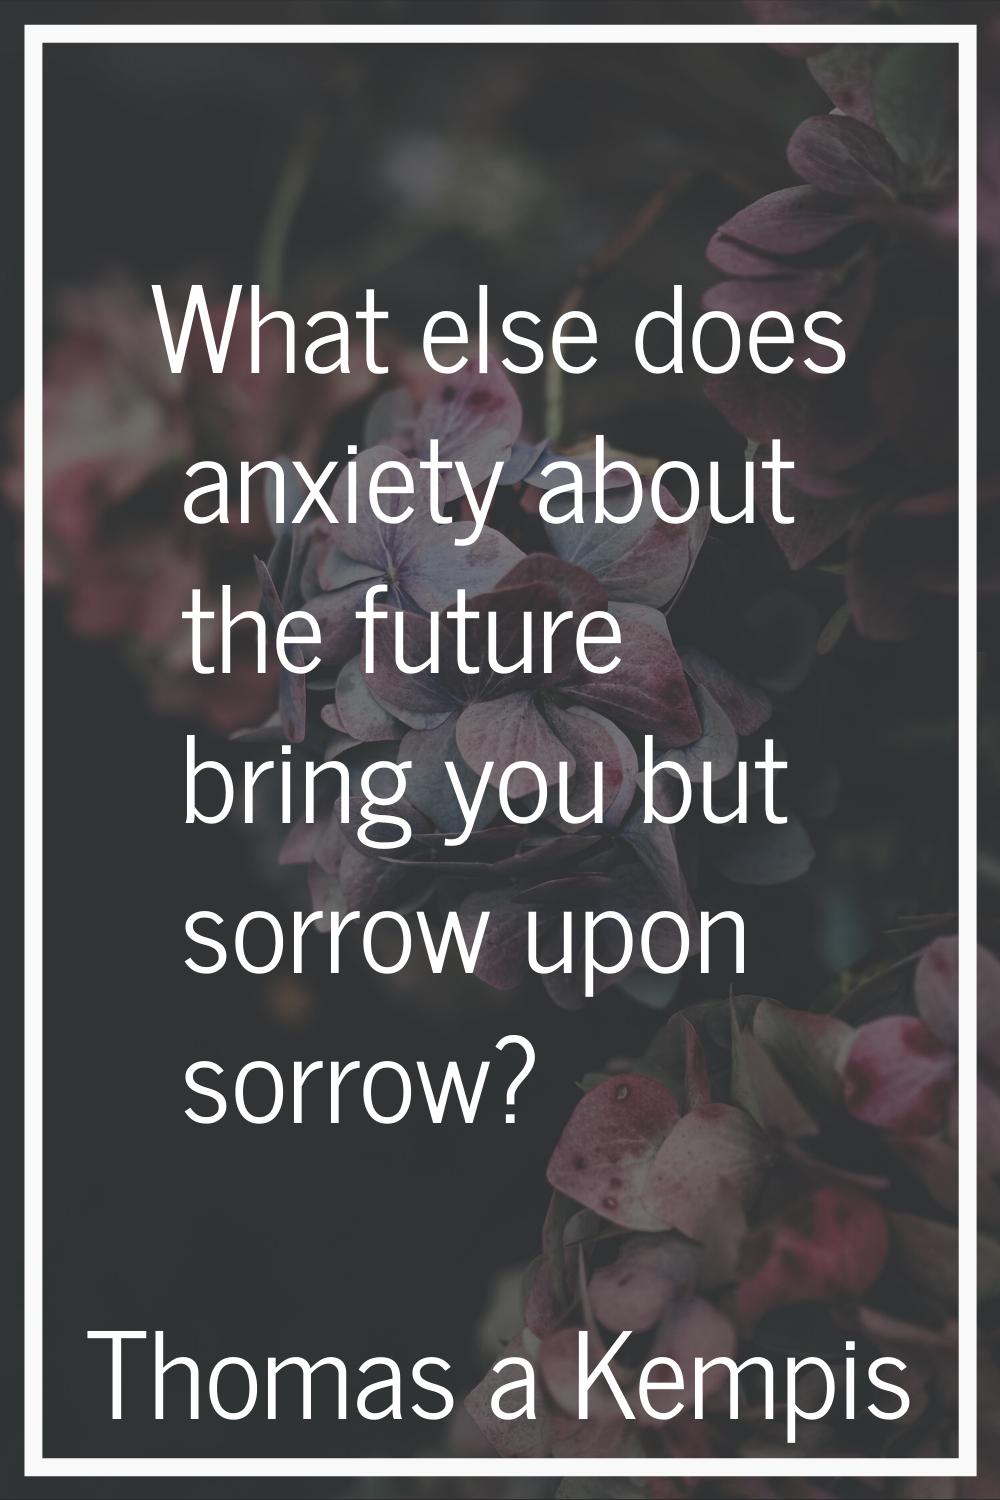 What else does anxiety about the future bring you but sorrow upon sorrow?